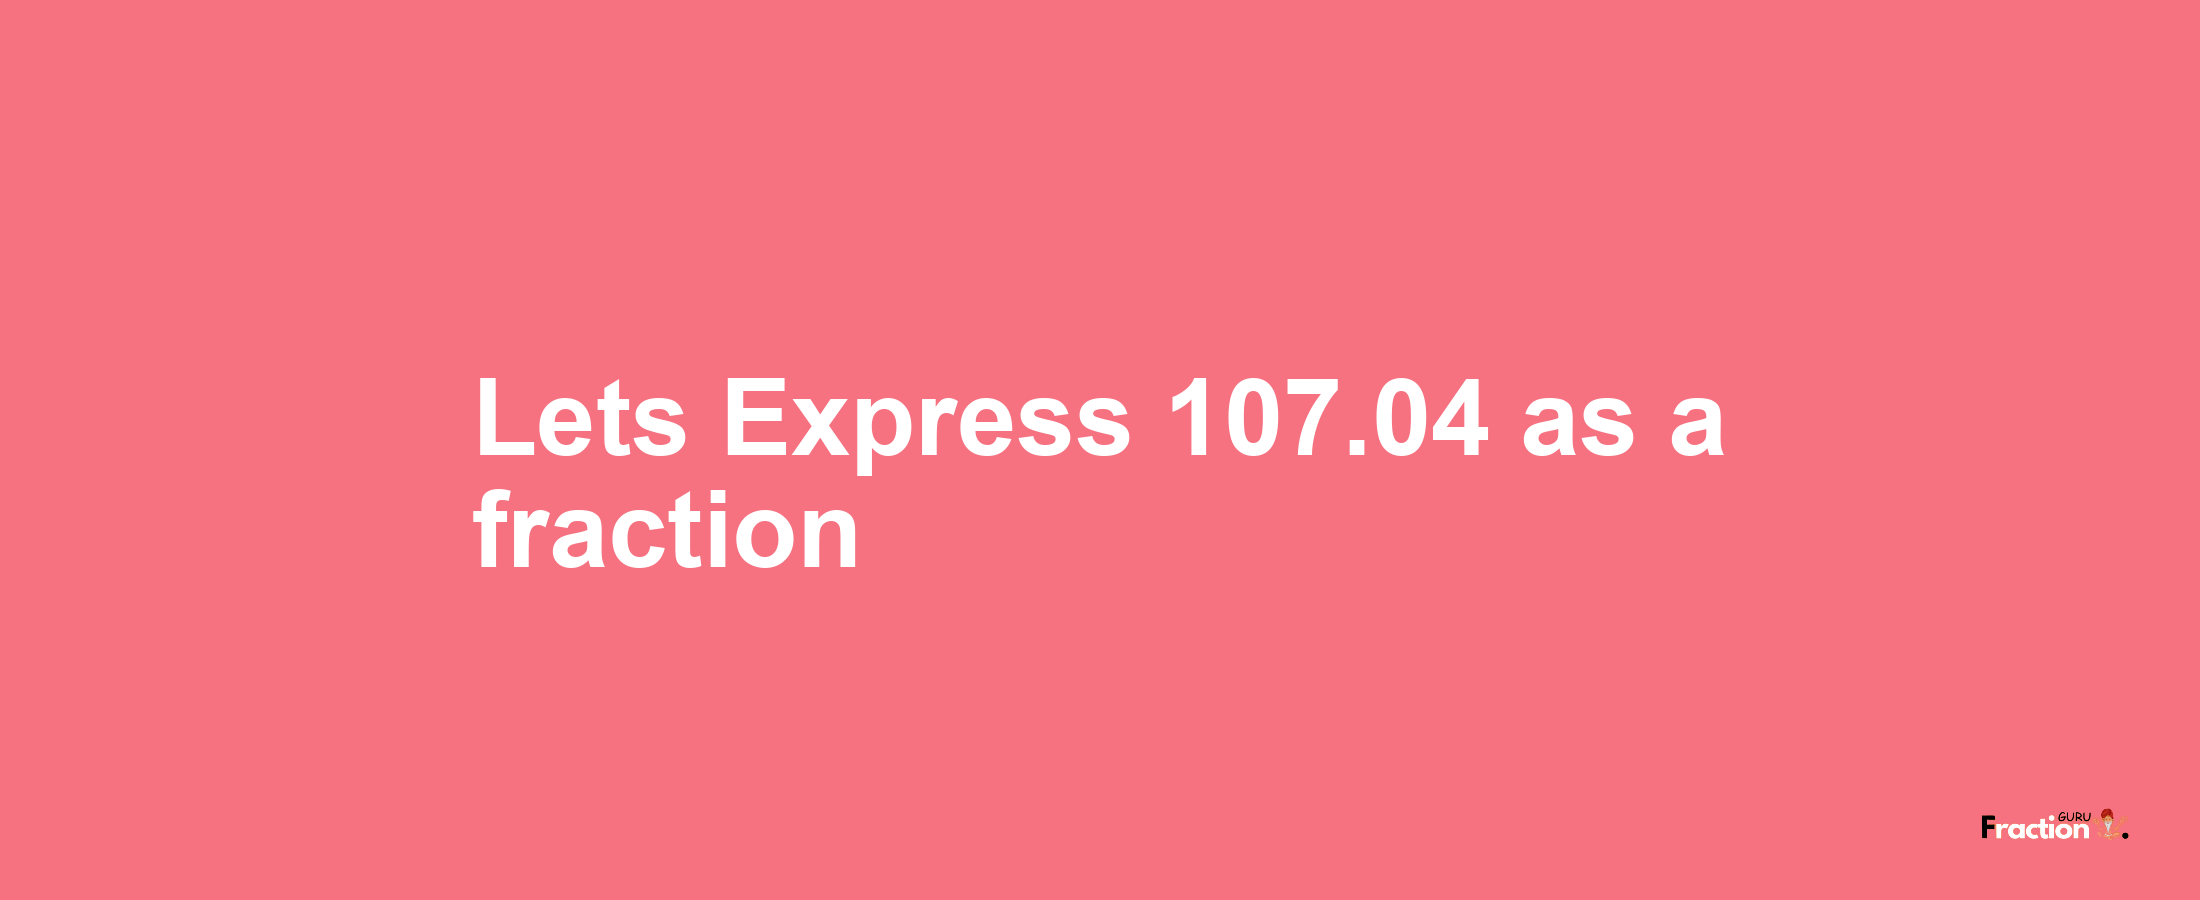 Lets Express 107.04 as afraction